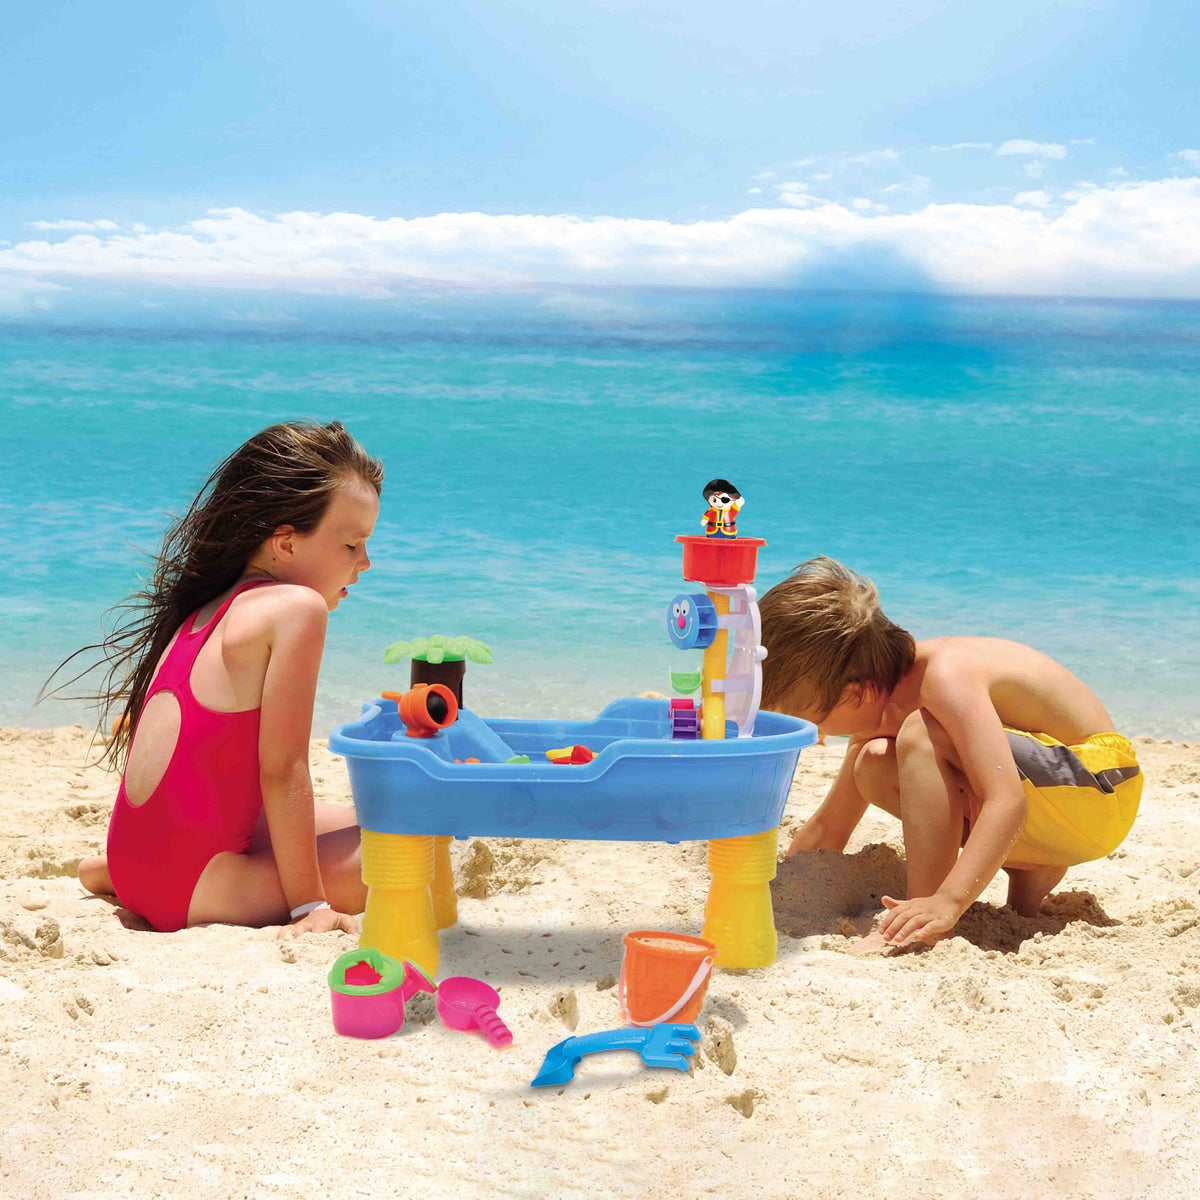 Kids playing with the Children's Pirate Theme Ship Sand & Water Table at a beach.